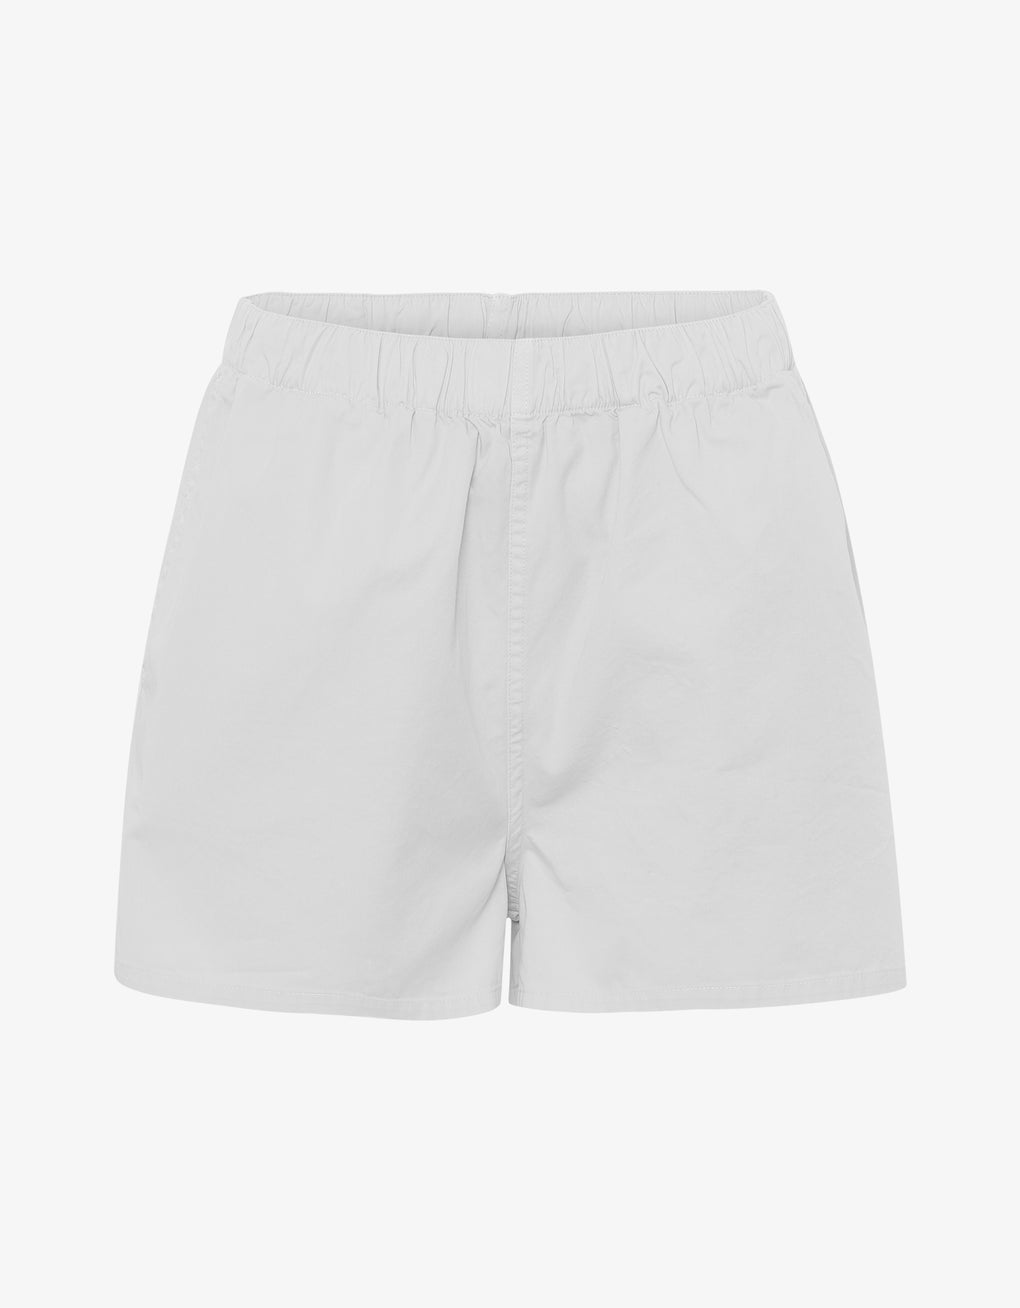 TWILL SHORTS BY COLORFUL STANDARD